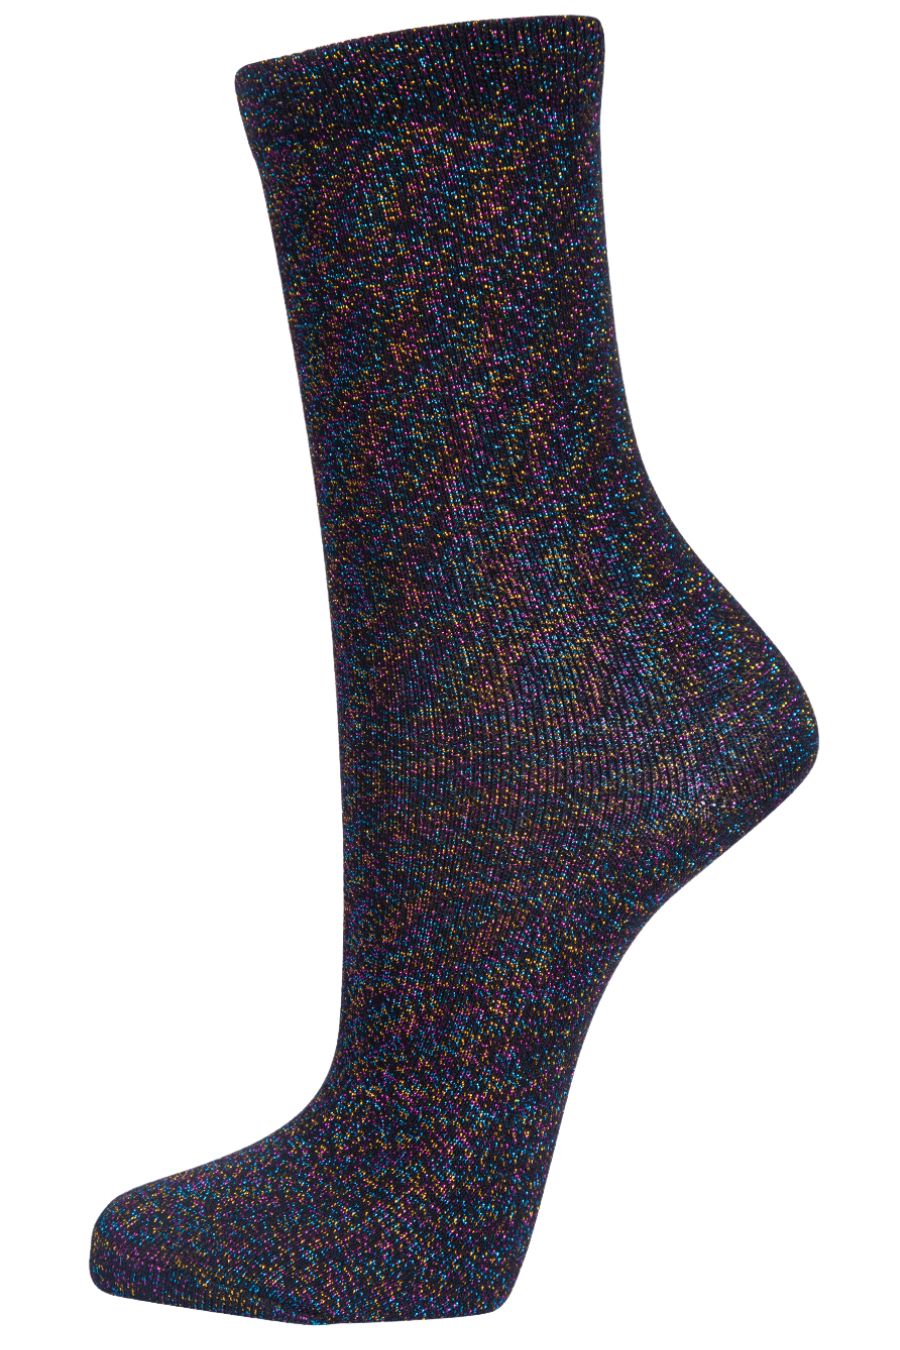 black ankle socks with an all over multicoloured rainbow glitter effect